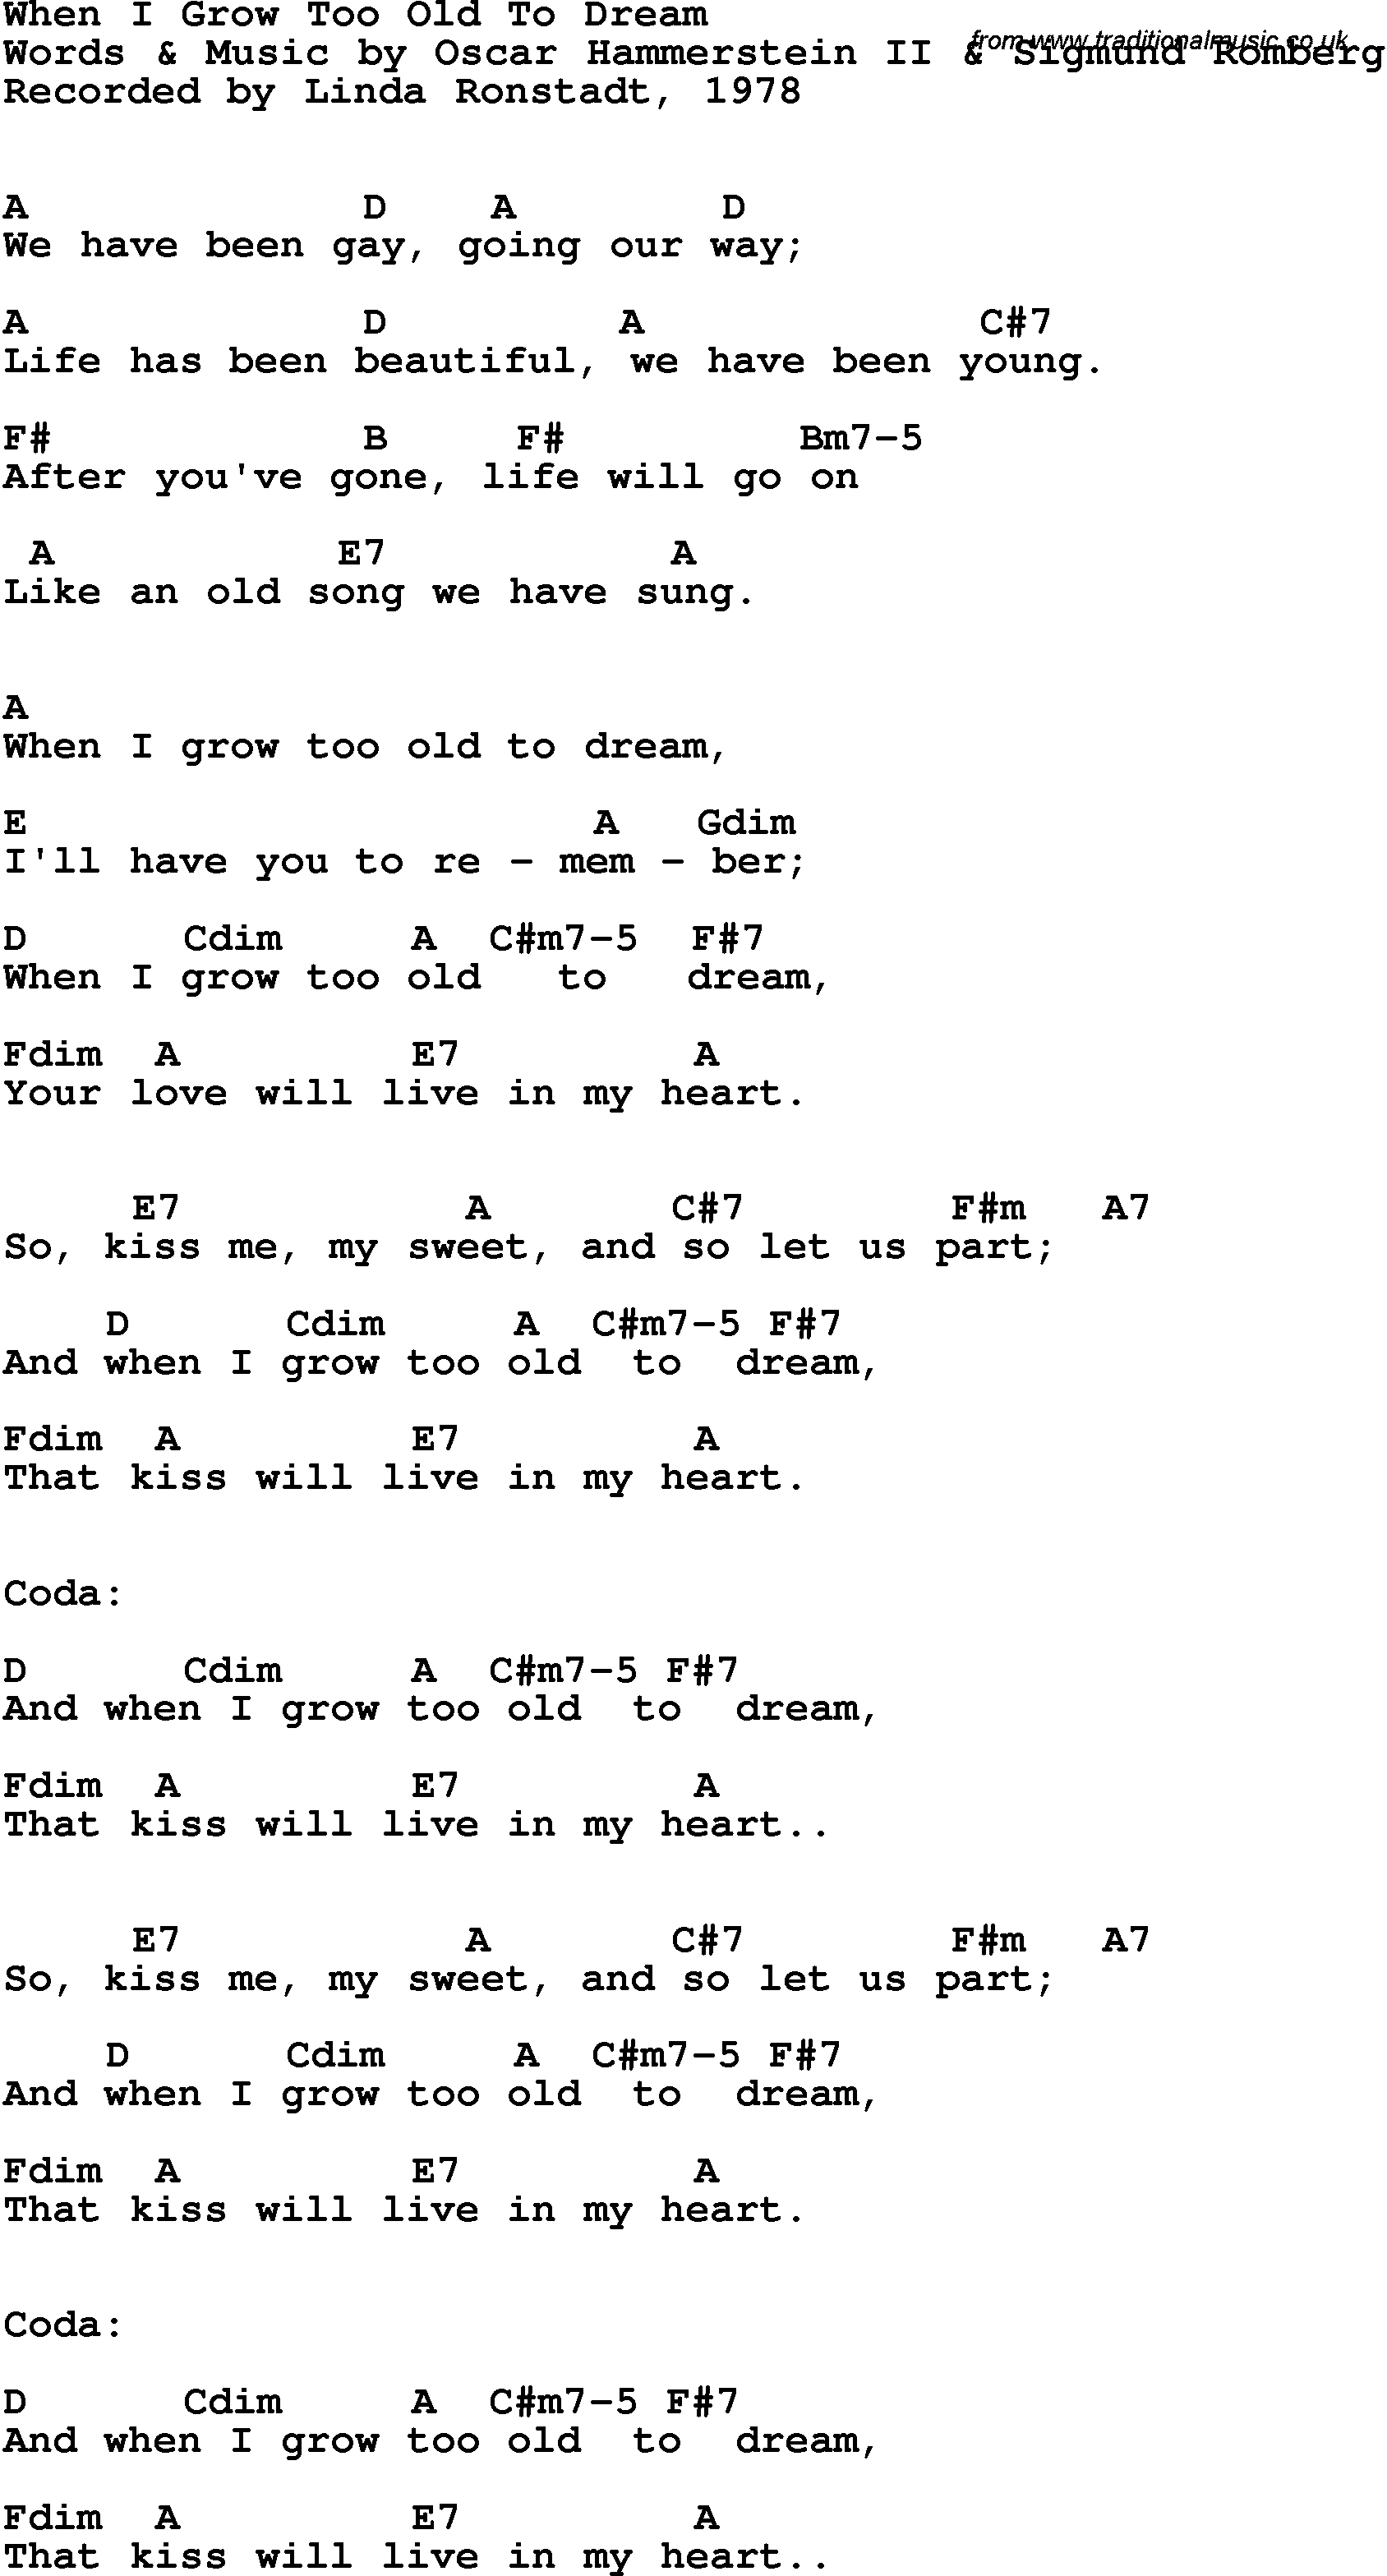 Song Lyrics with guitar chords for When I Grow Too Old To Dream - Linda Ronstadt, 1978